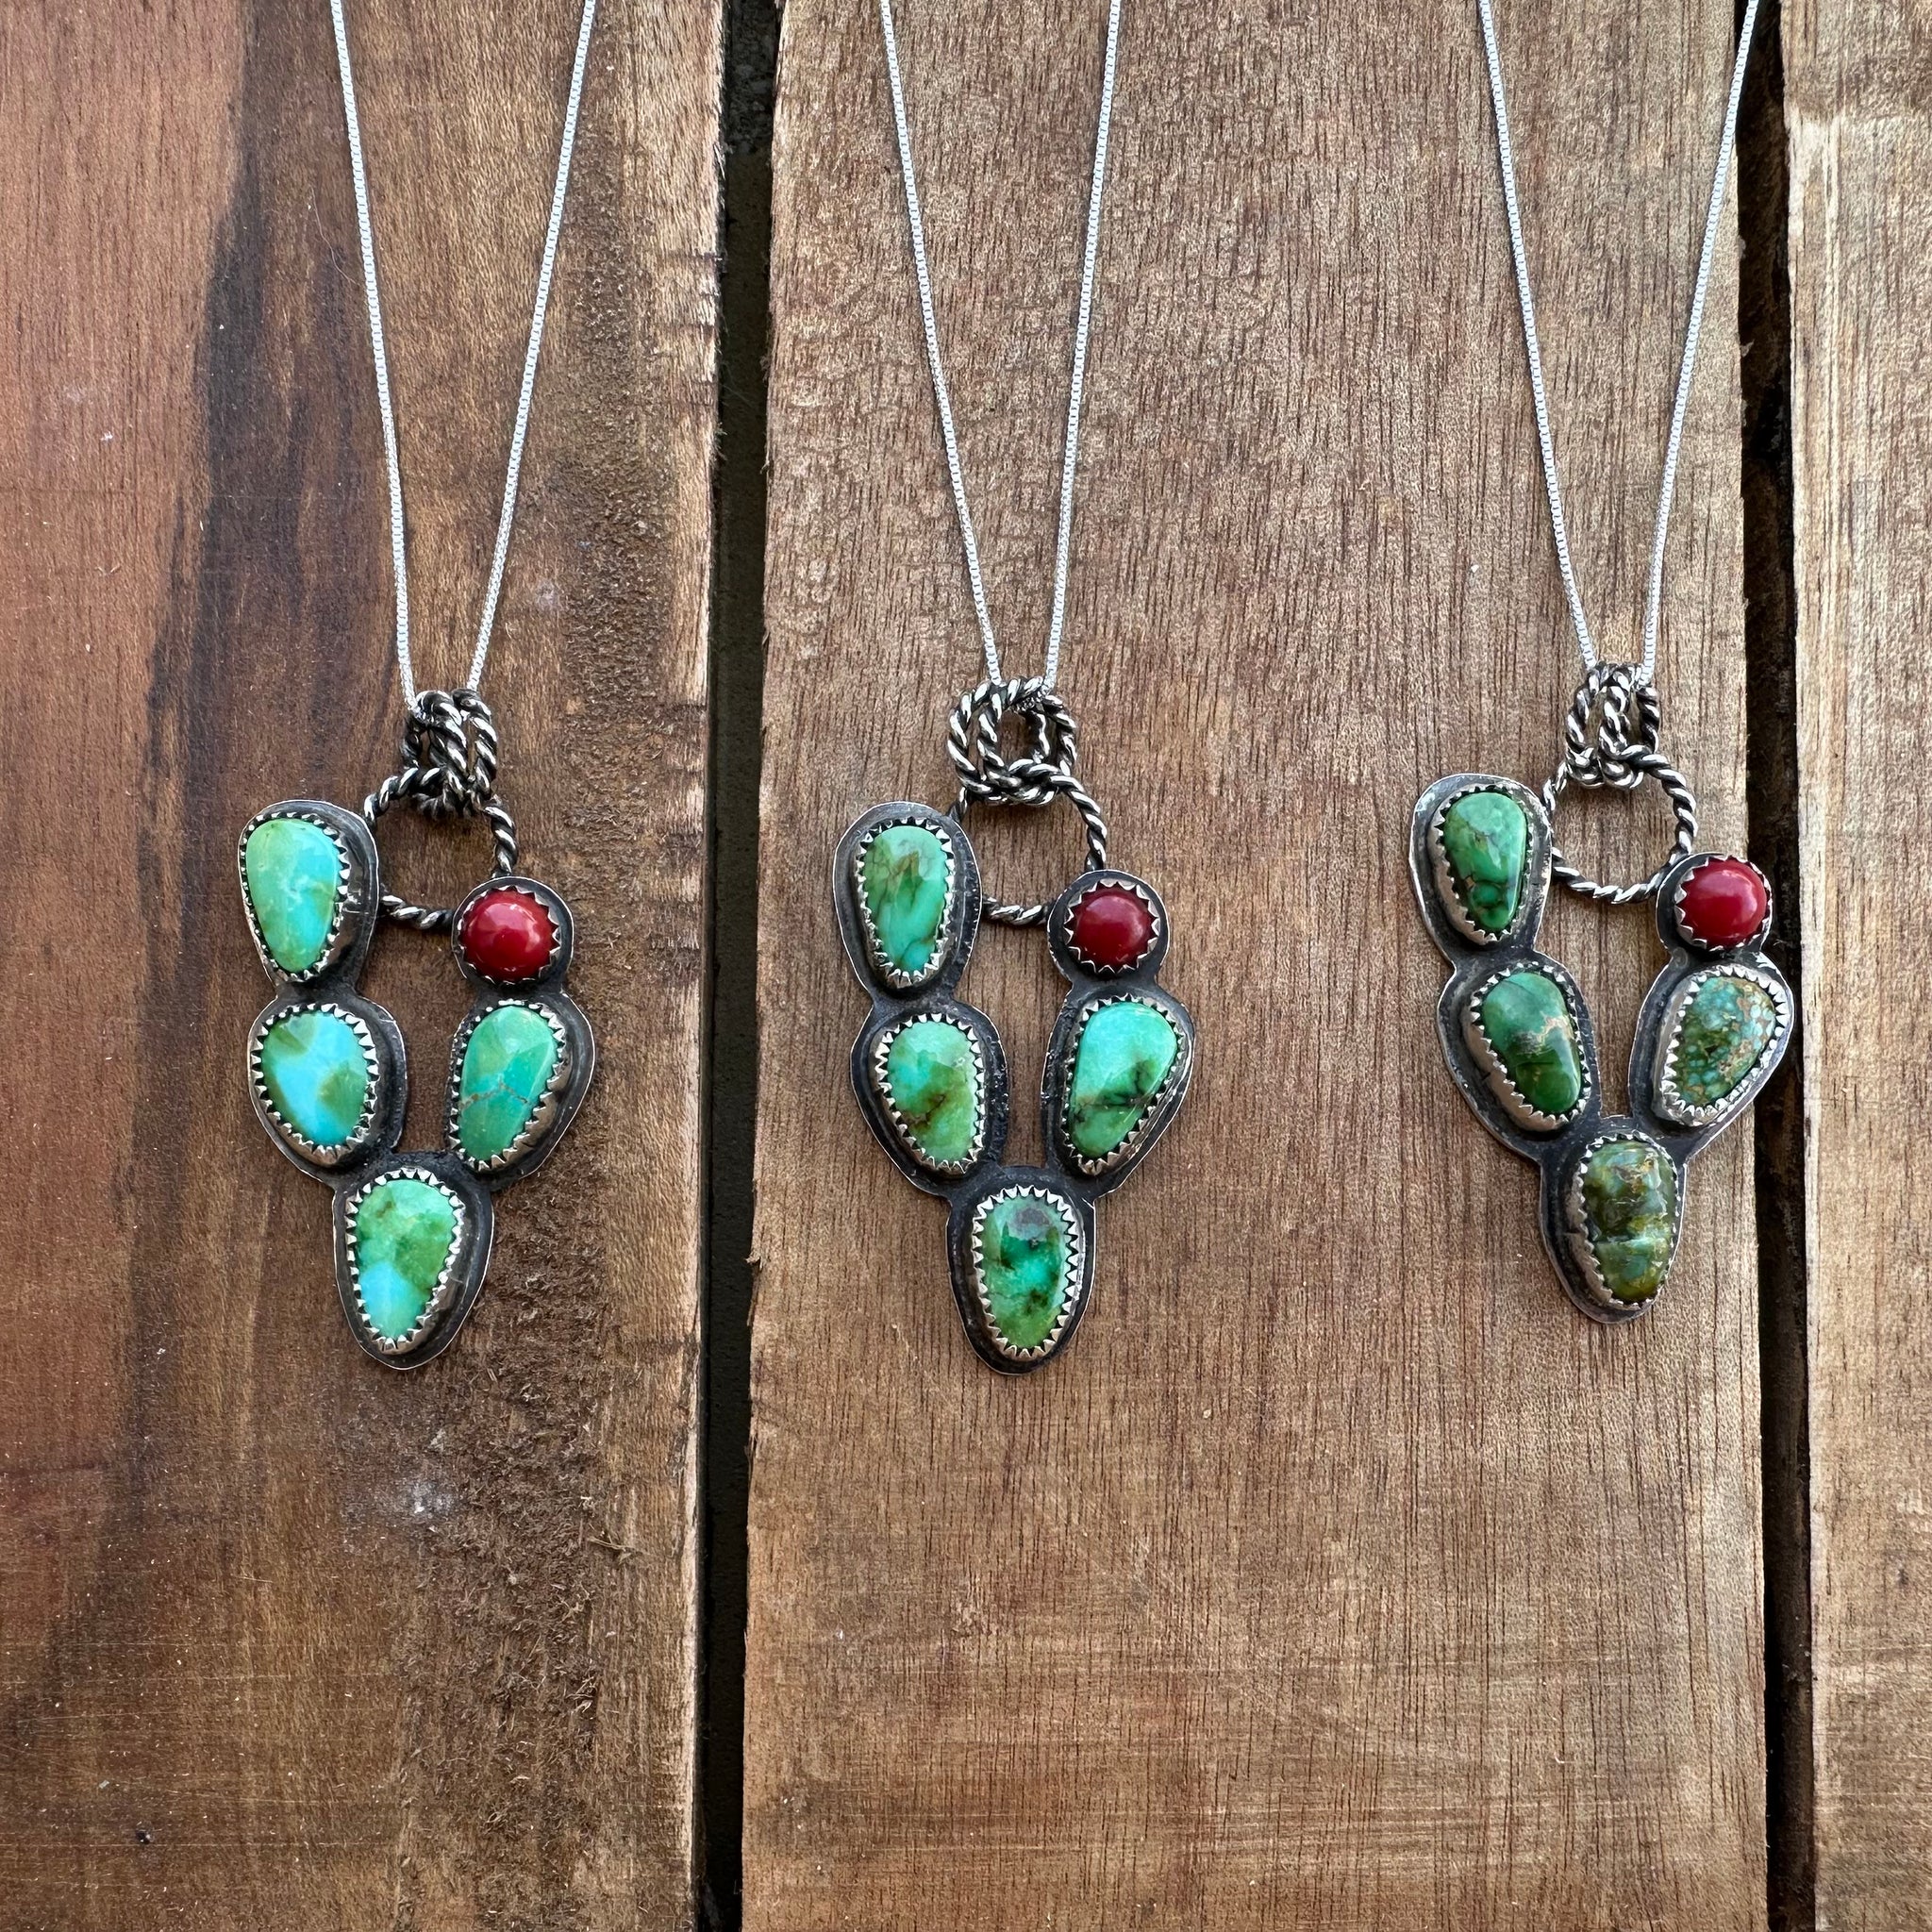 Prickly Pear Cactus Necklace - Sterling Silver with Emerald Valley Turquoise and Coral